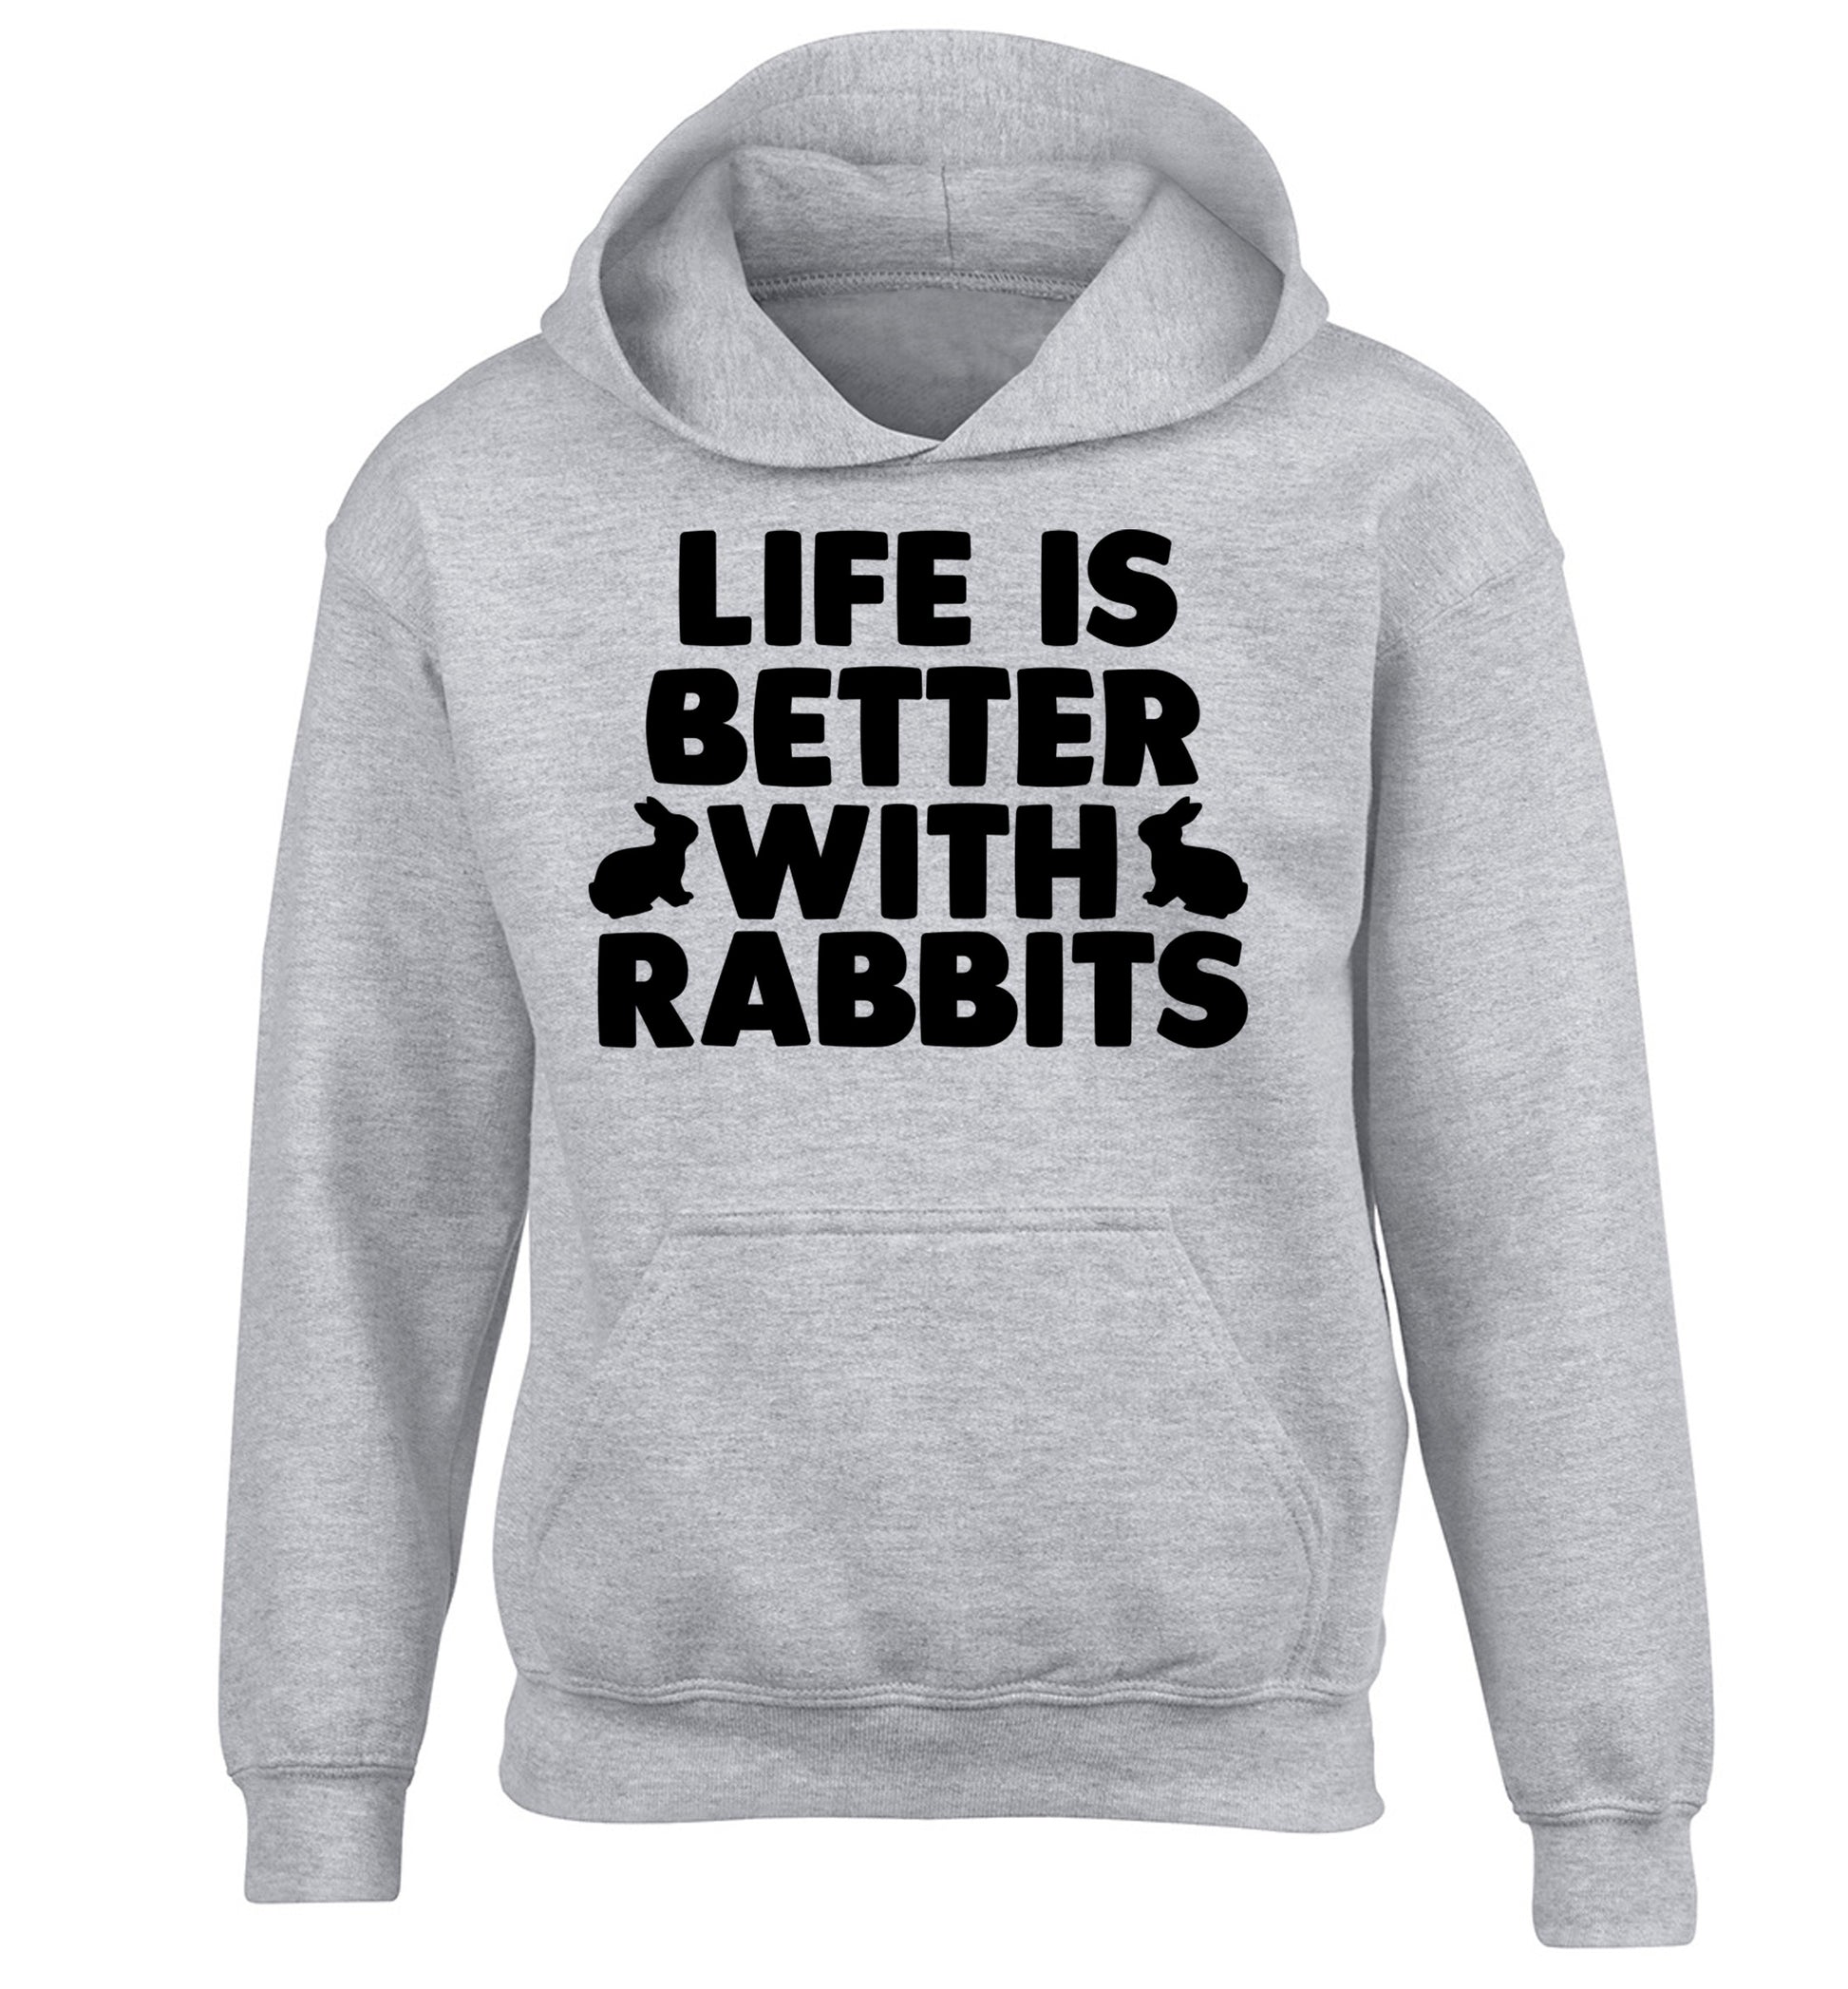 Life is better with rabbits children's grey hoodie 12-14 Years